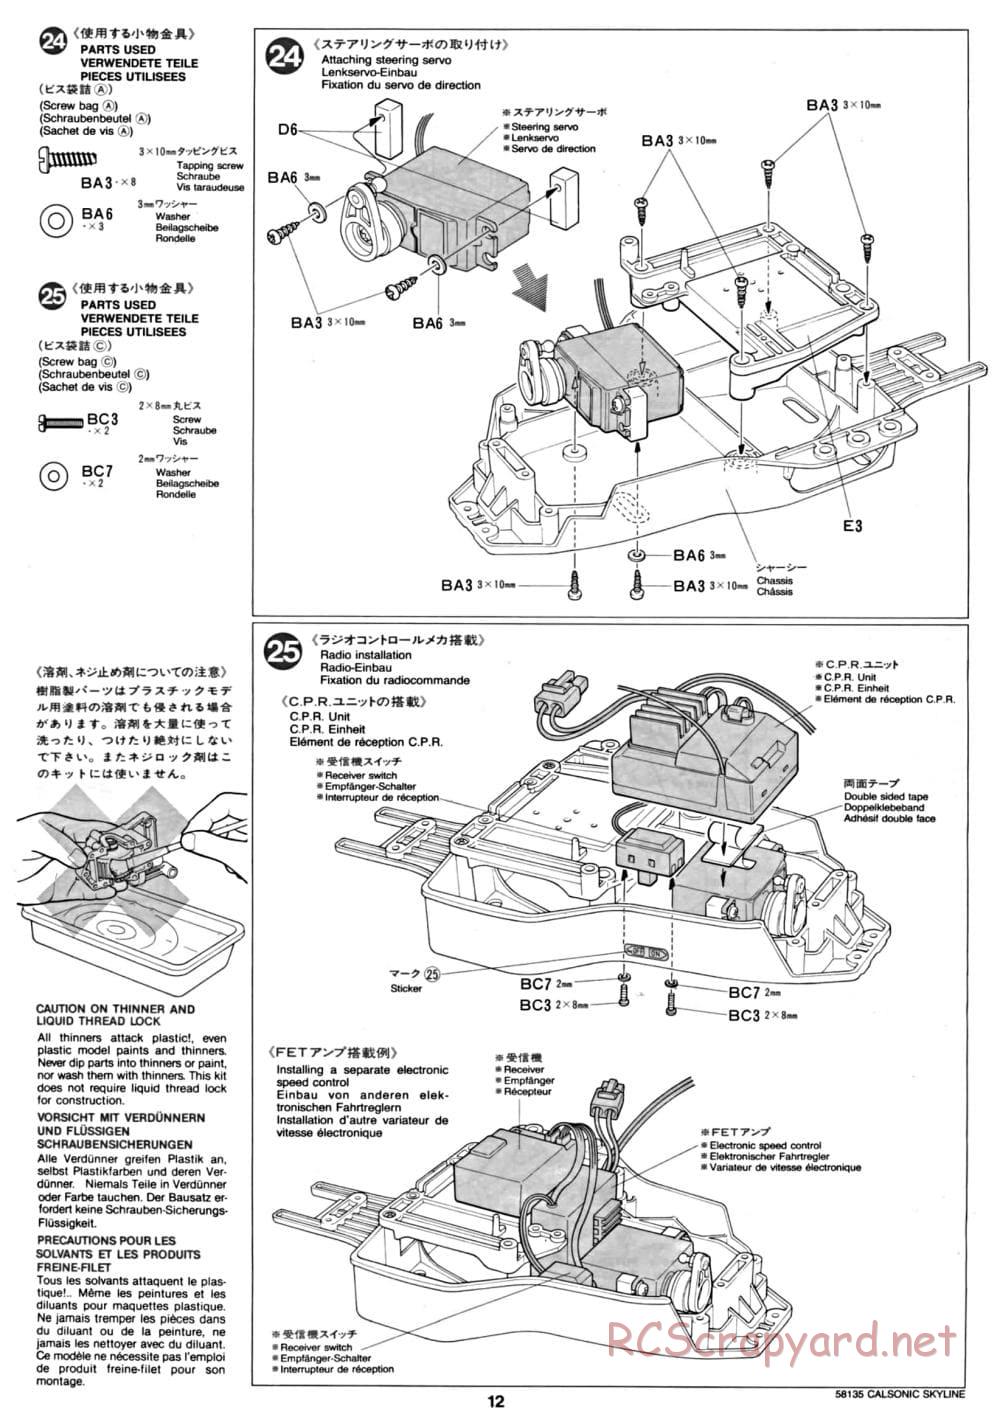 Tamiya - Calsonic Skyline GT-R Gr.A - TA-02 Chassis - Manual - Page 12